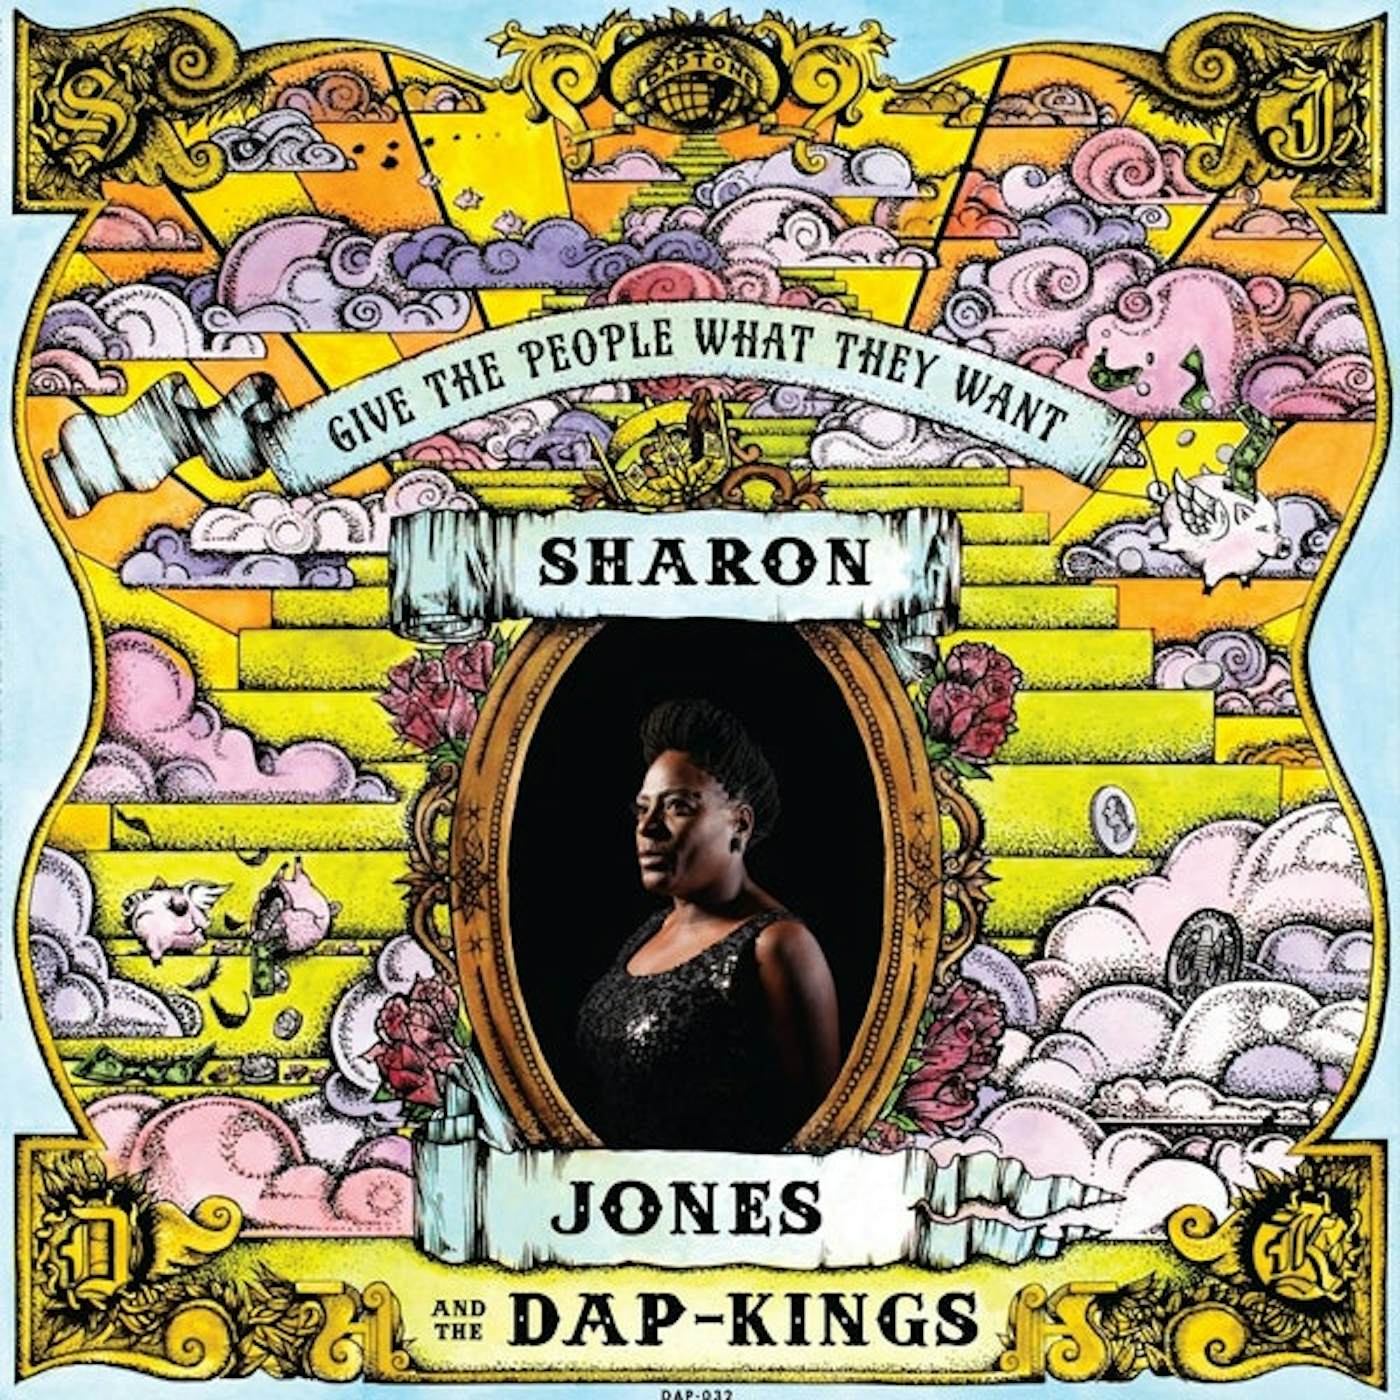 Sharon Jones & The Dap-Kings Give the People What They Want Vinyl Record